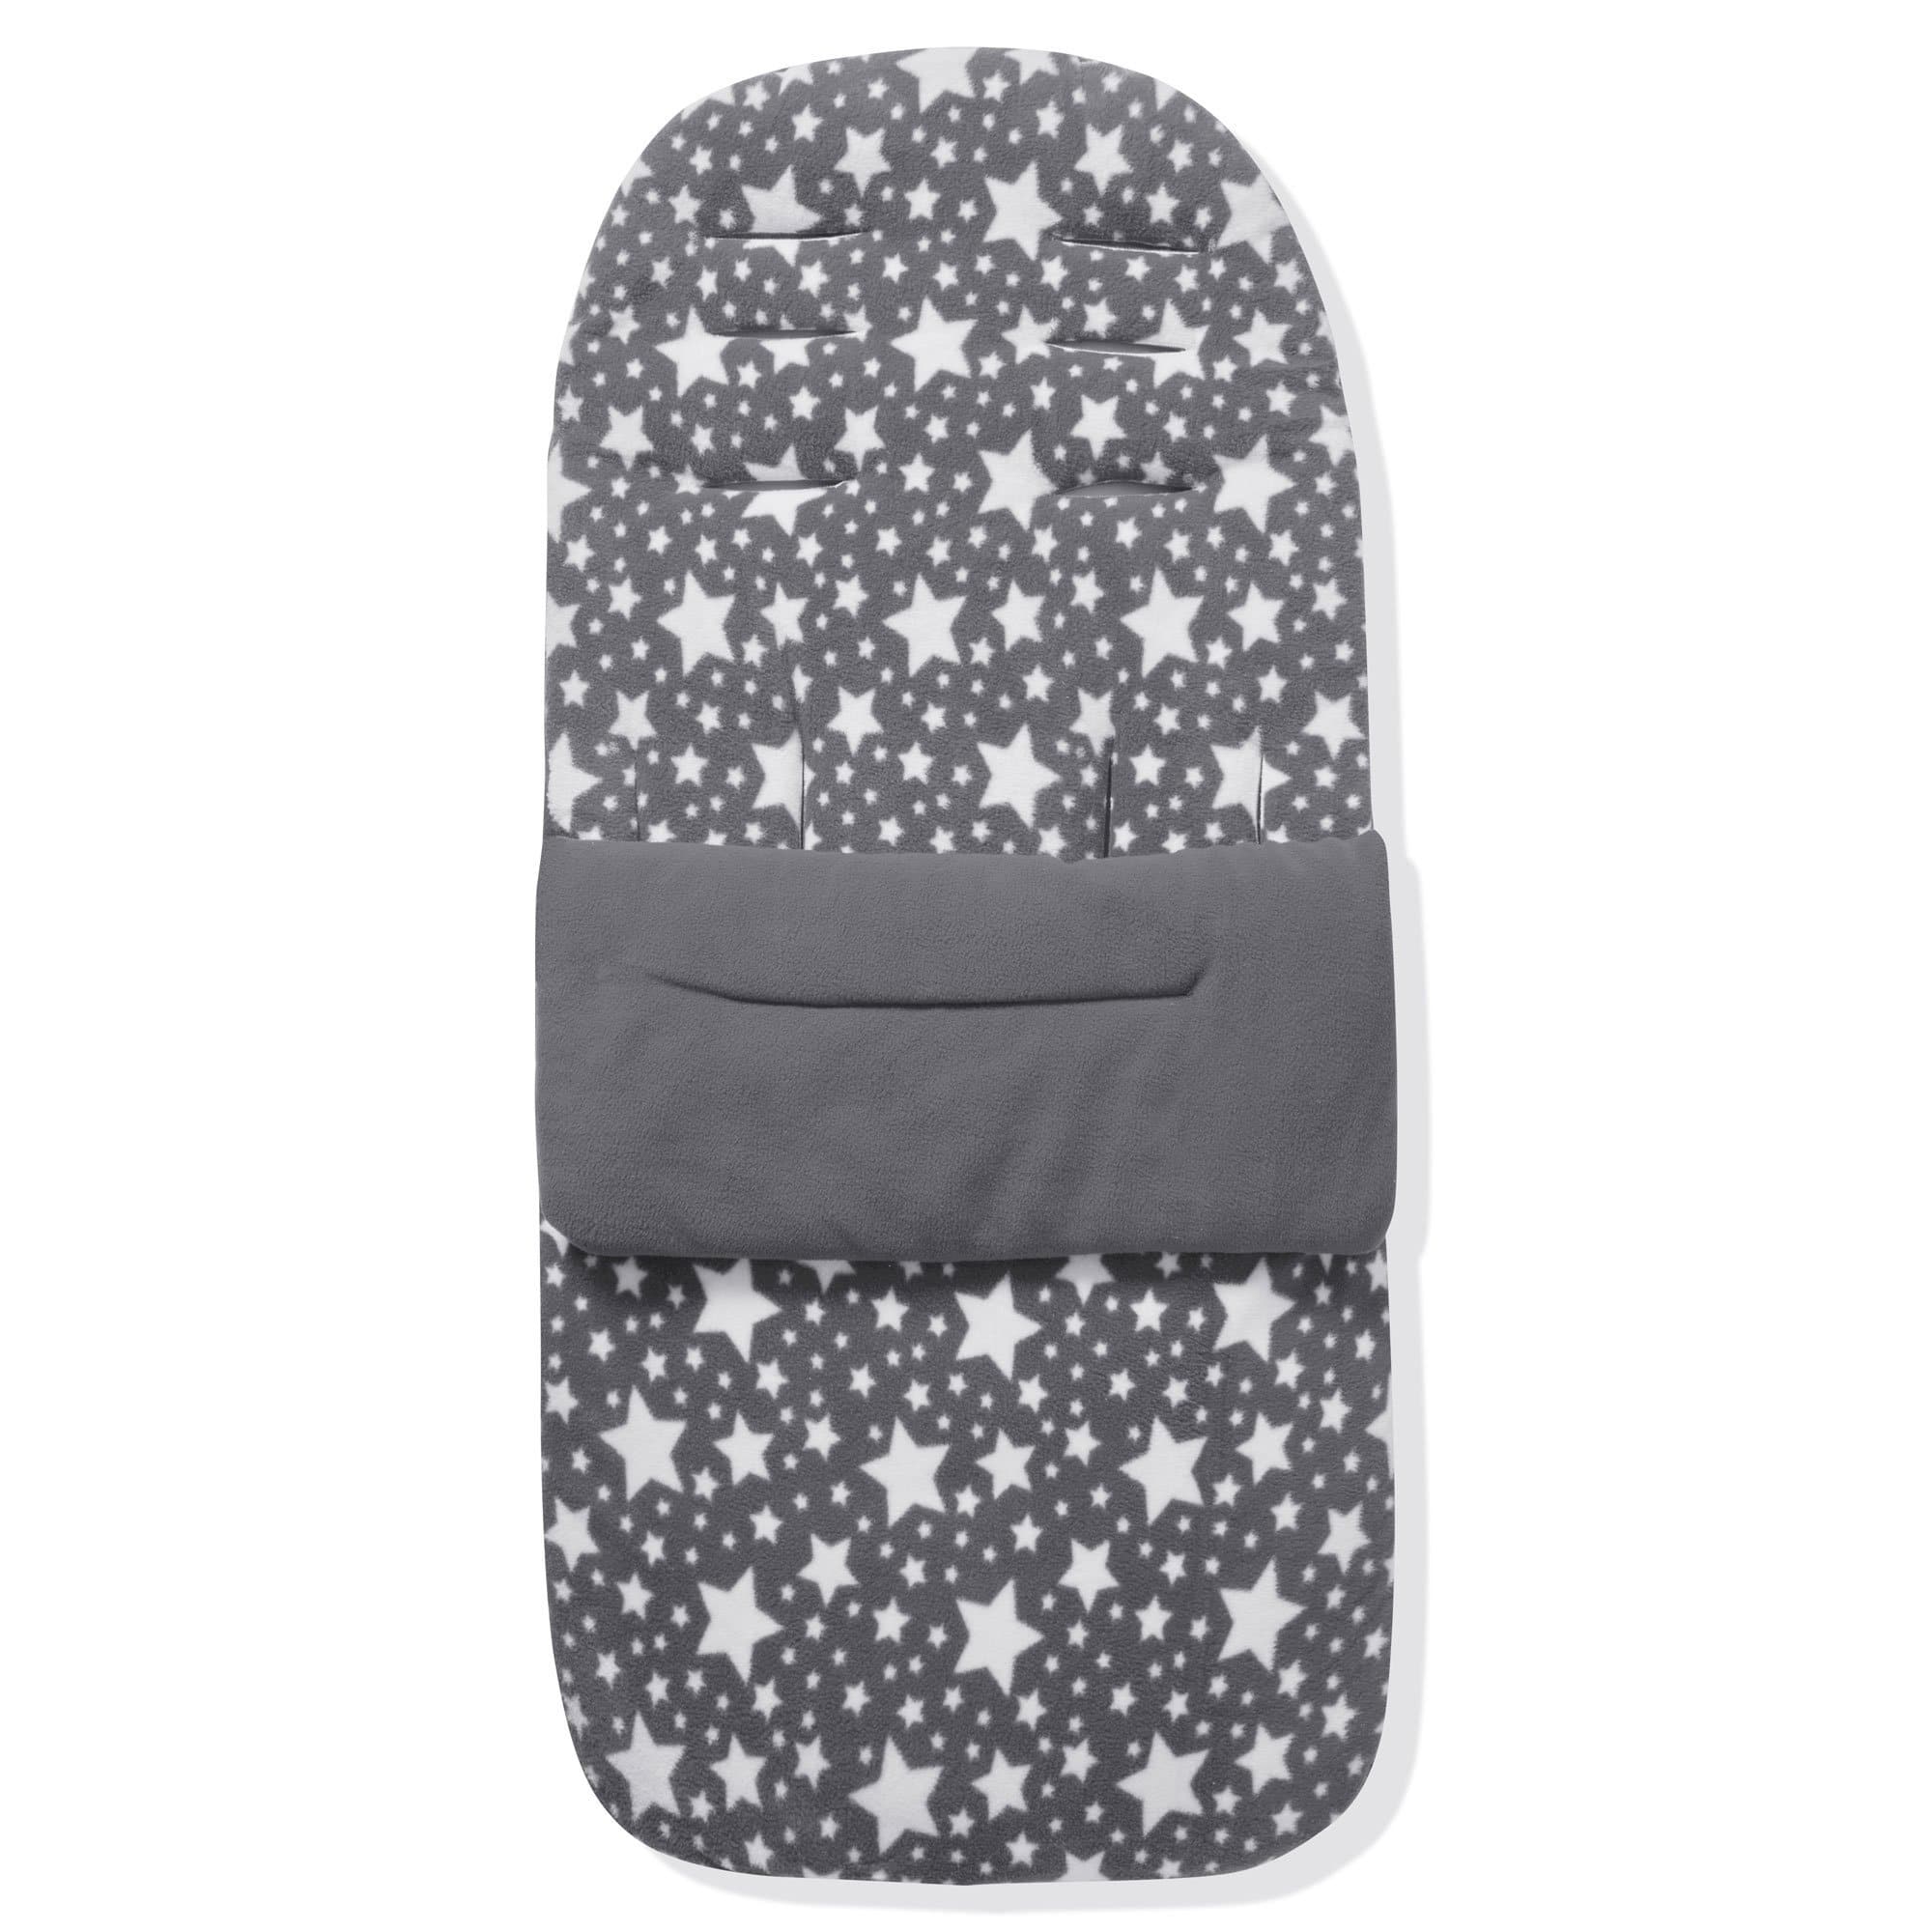 Fleece Footmuff / Cosy Toes Compatible with Koelstra - Grey Star / Fits All Models | For Your Little One